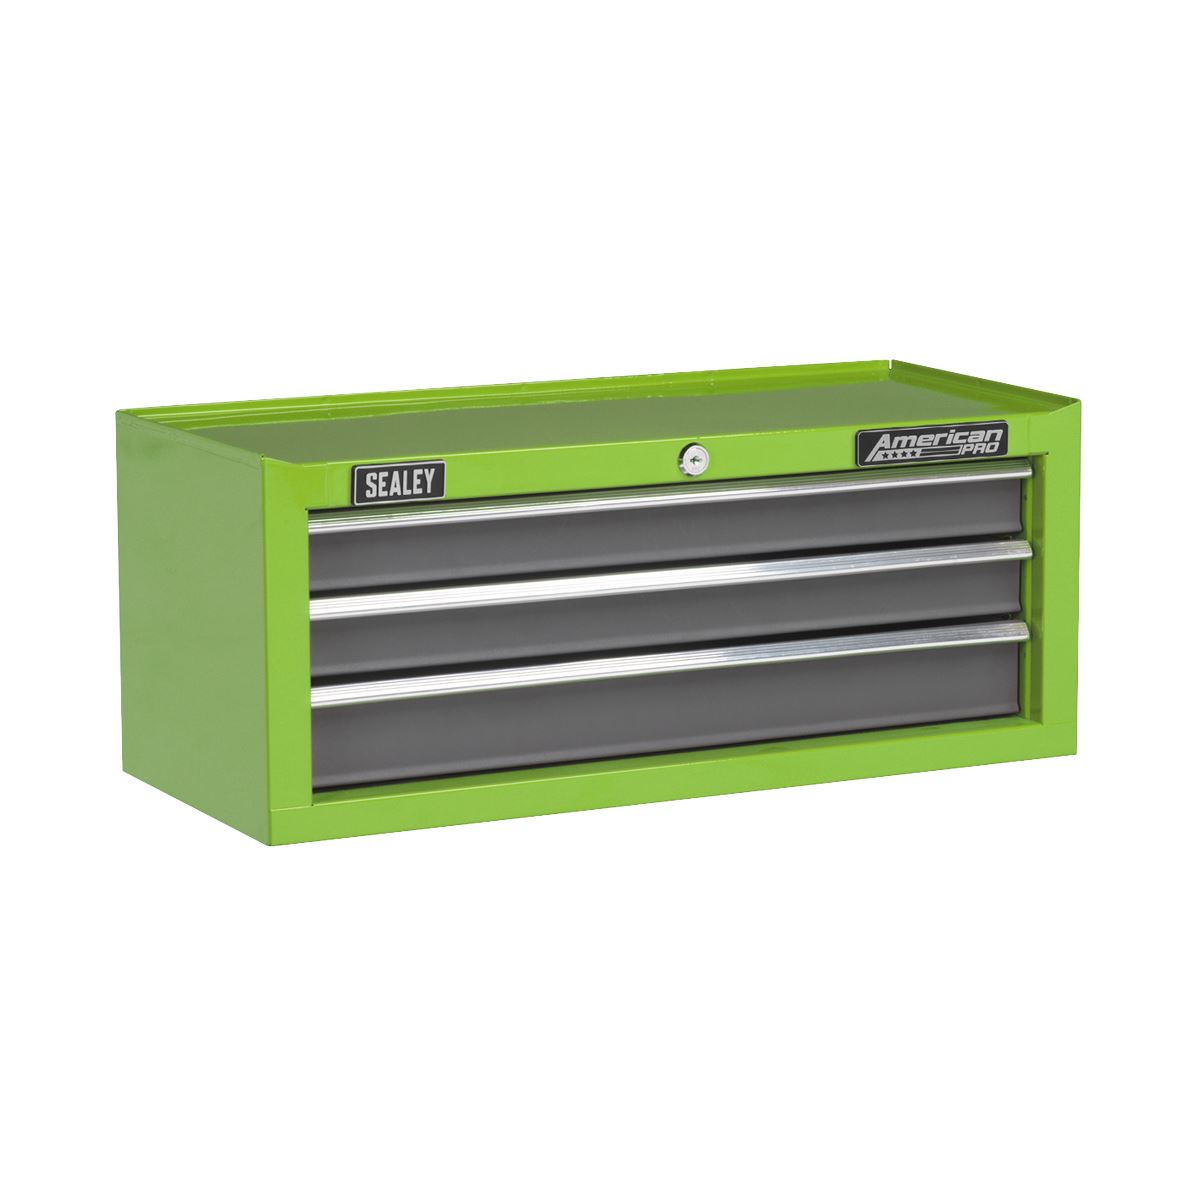 Sealey American Pro Mid-Box Tool Chest 3 Drawer with Ball-Bearing Slides - Green/Grey